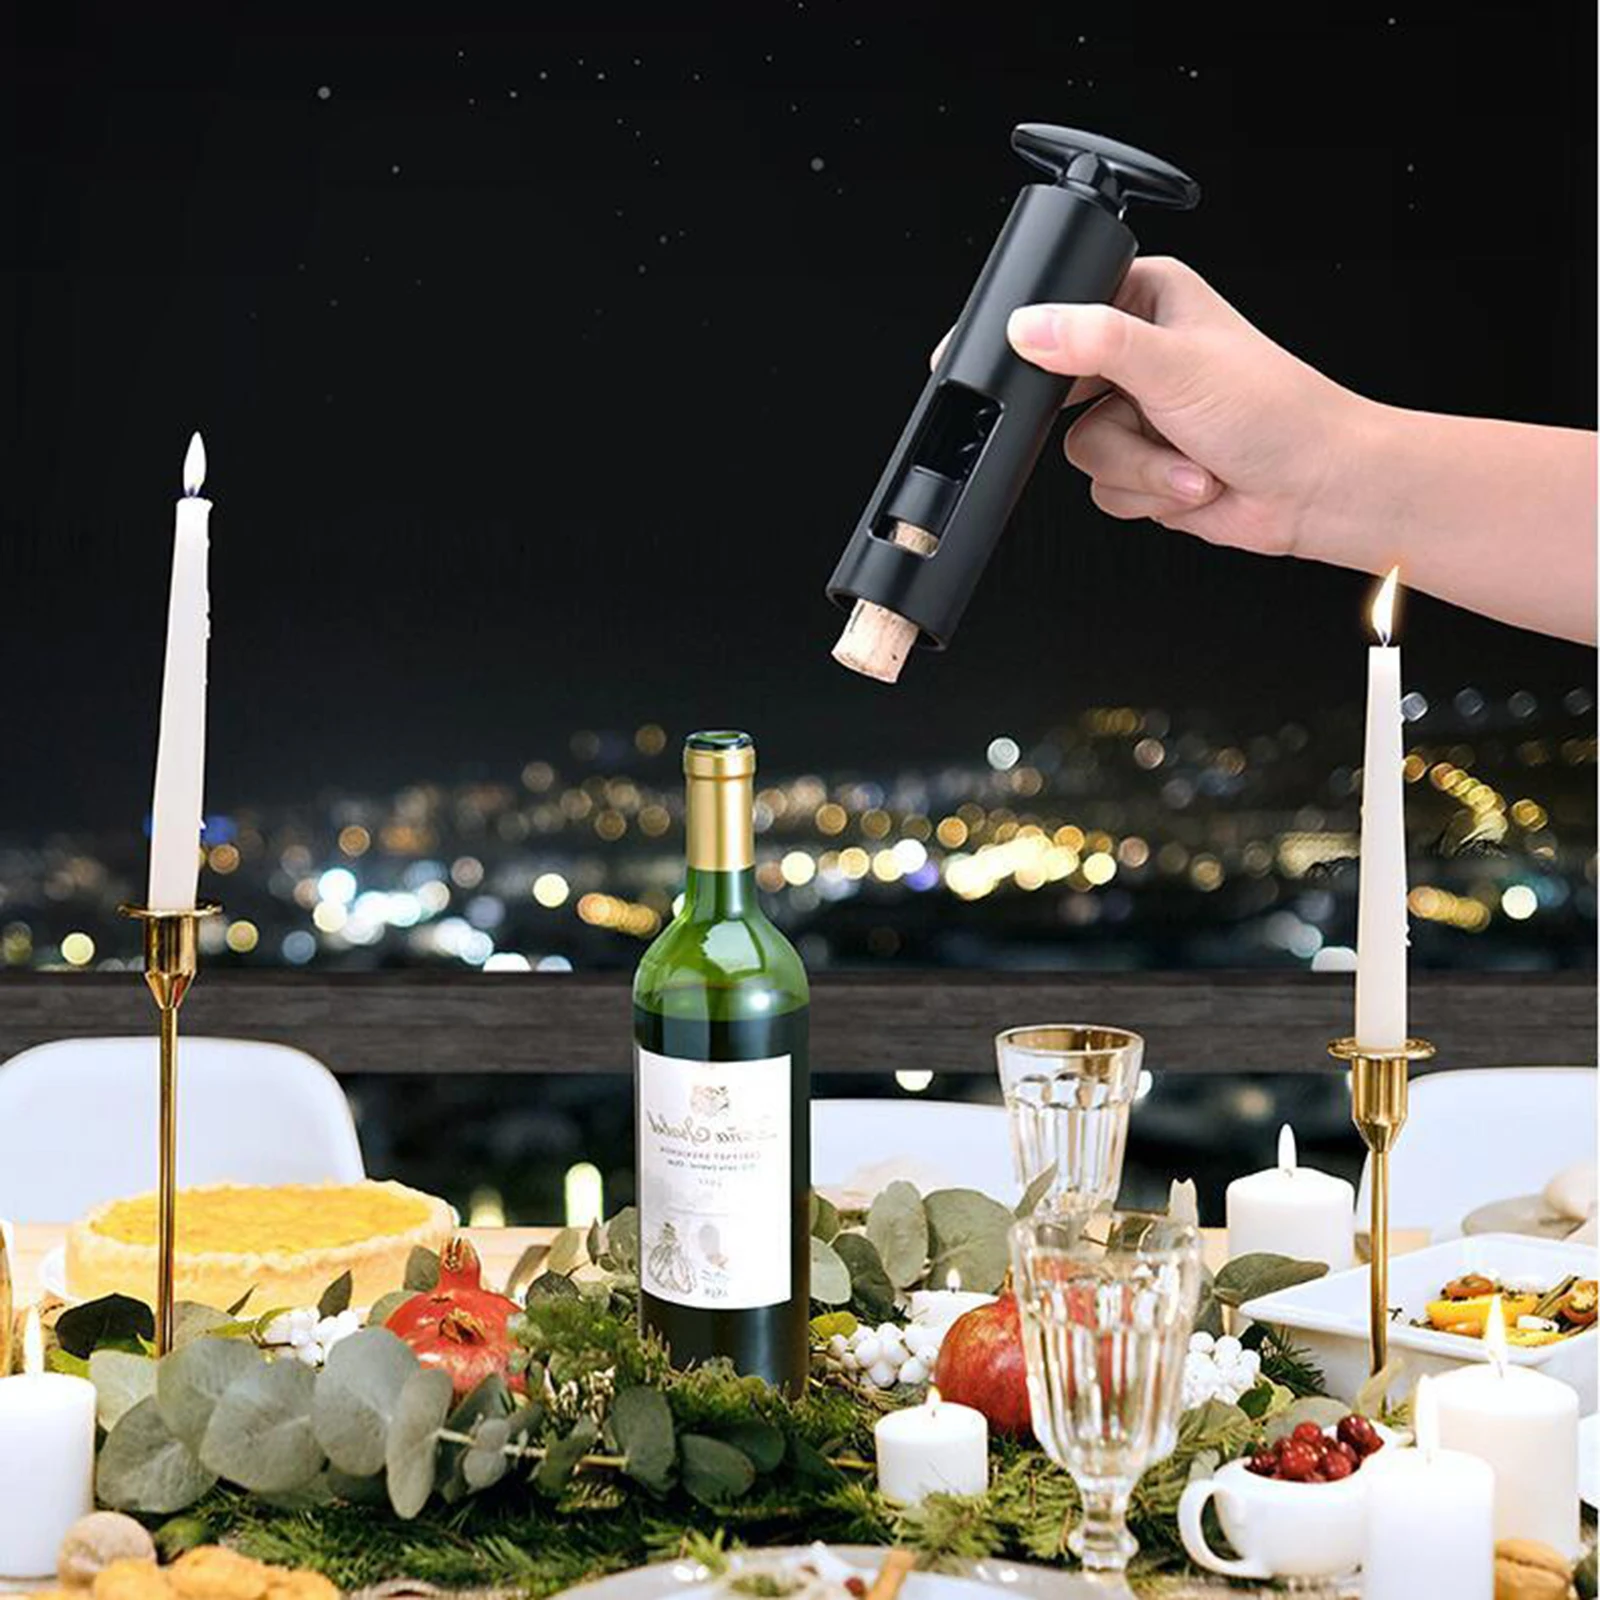 Corked Wine Opener Tool Manual Wine Bottle Corkscrew Cork Screw Out Tool for